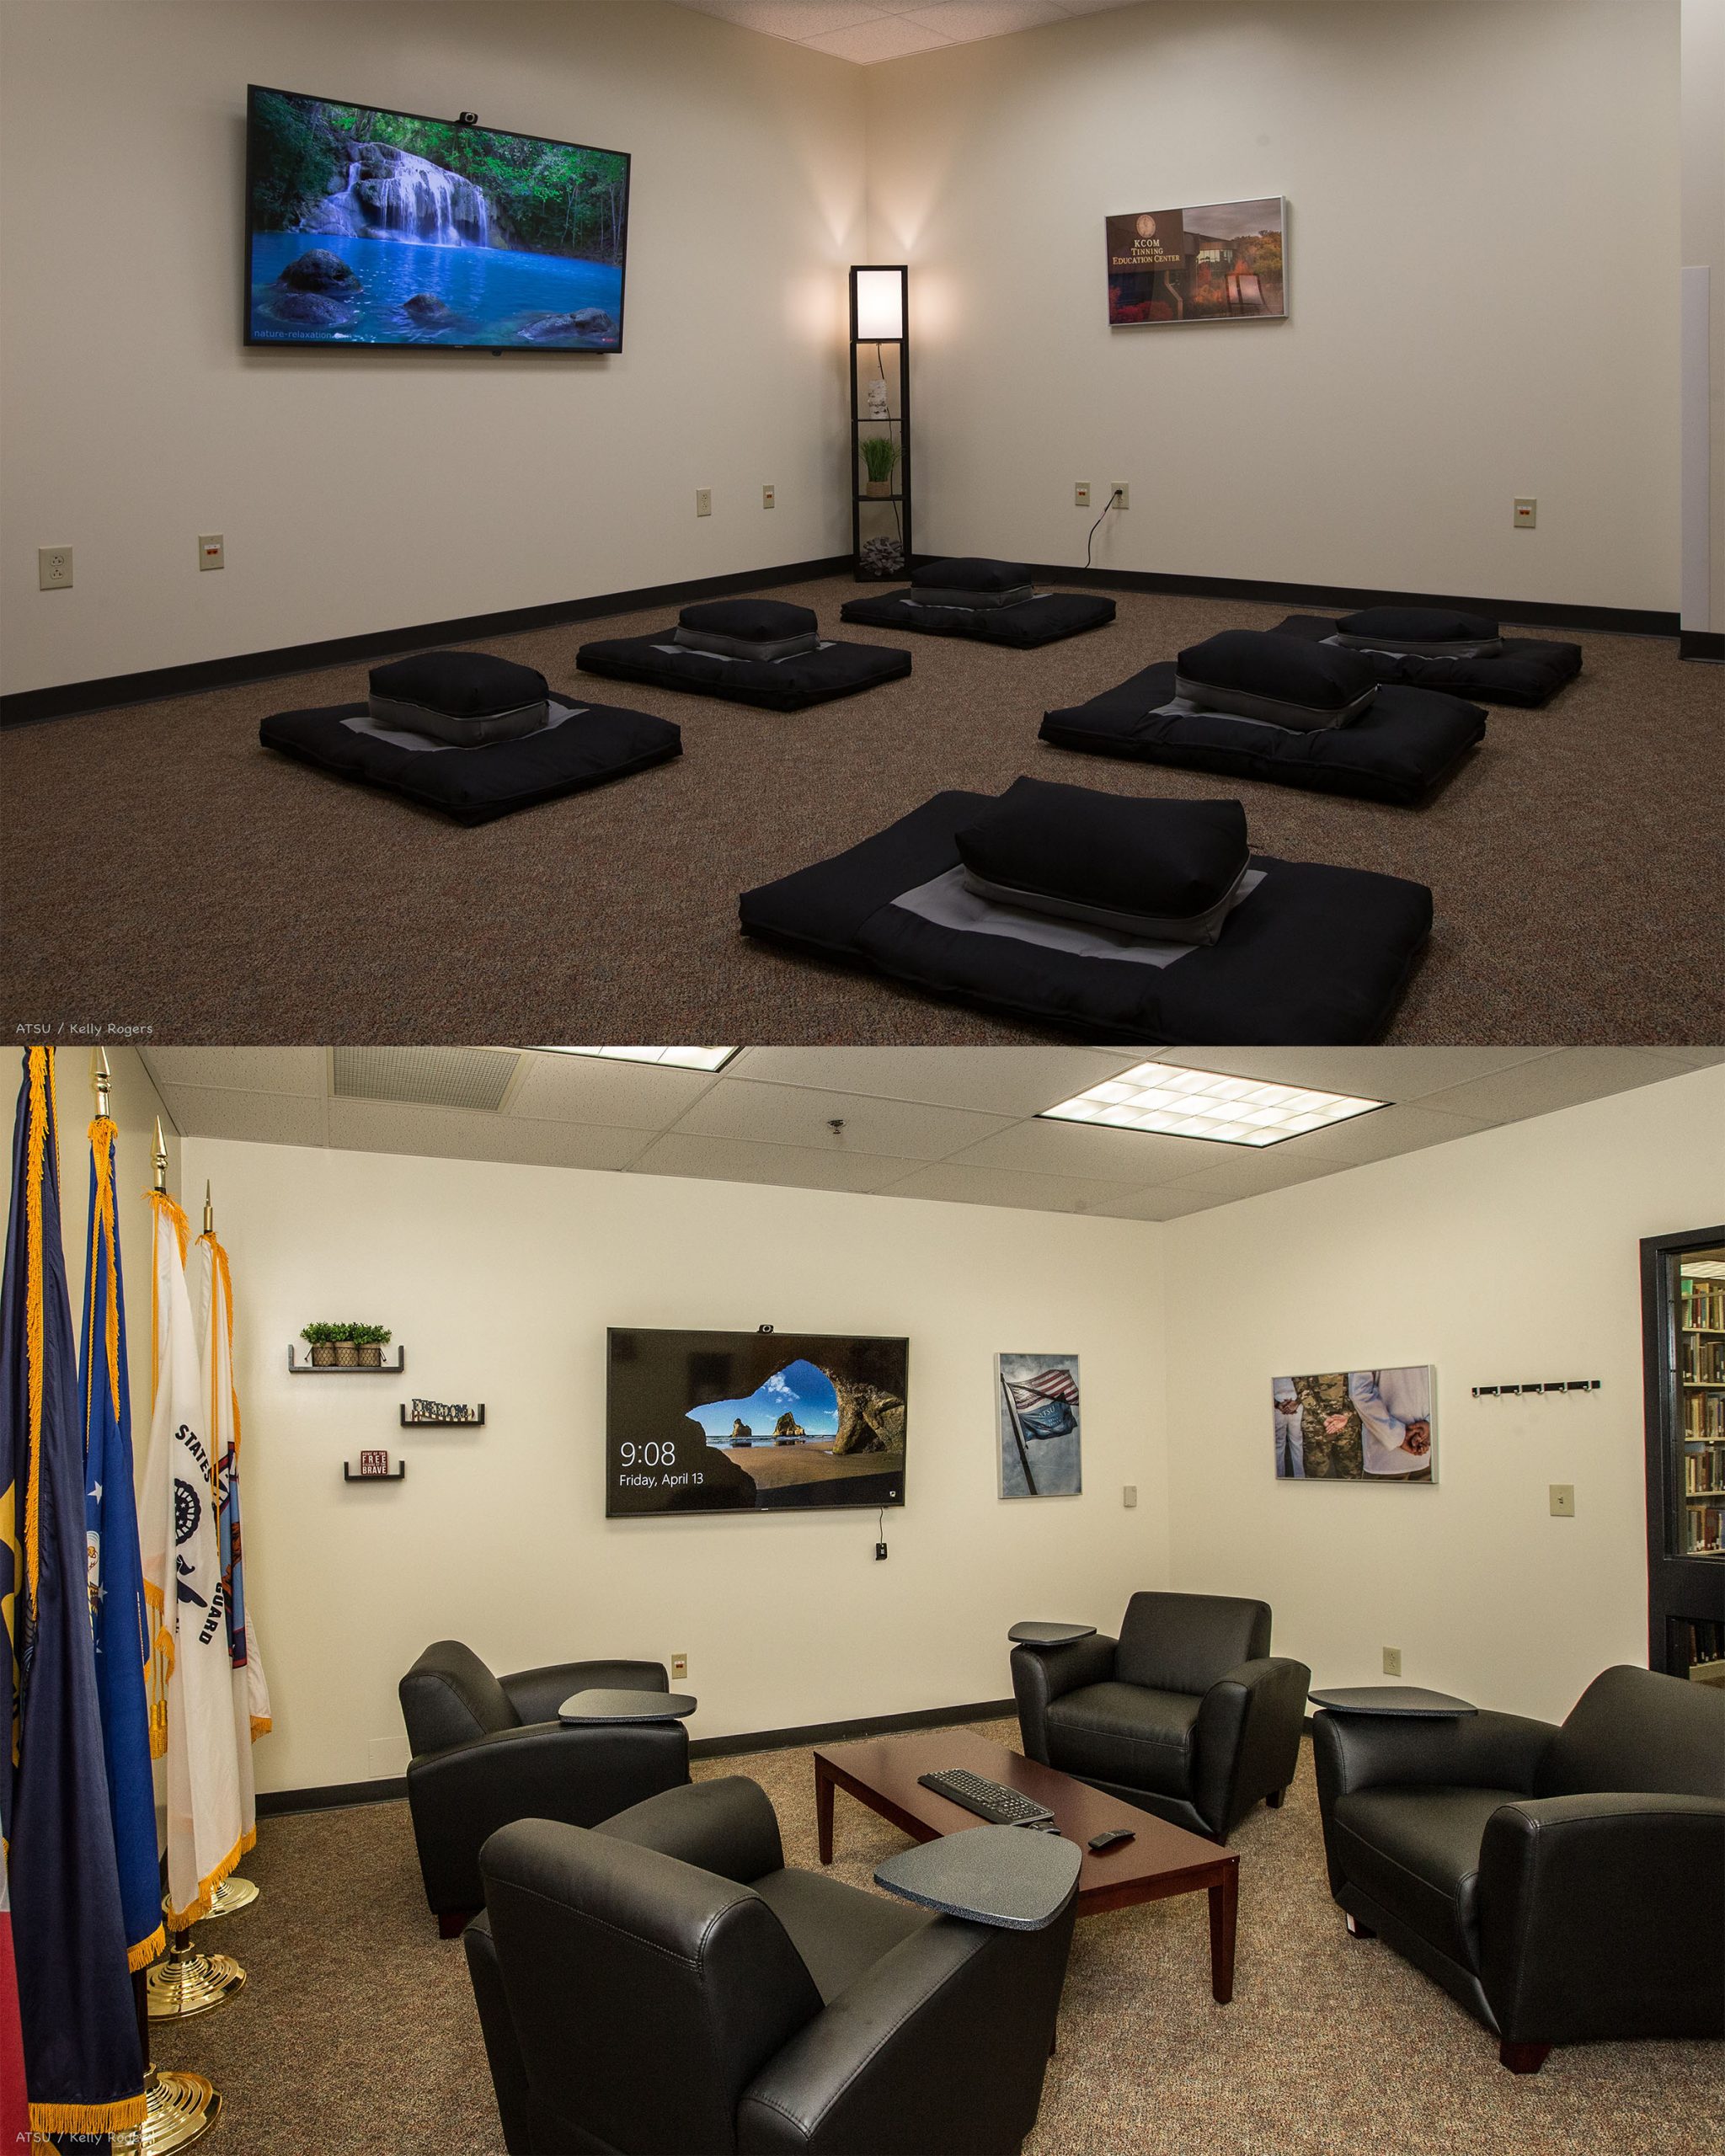 Meditation and Reflection Room pictured on top, and Military and Veteran Room pictured on bottom.